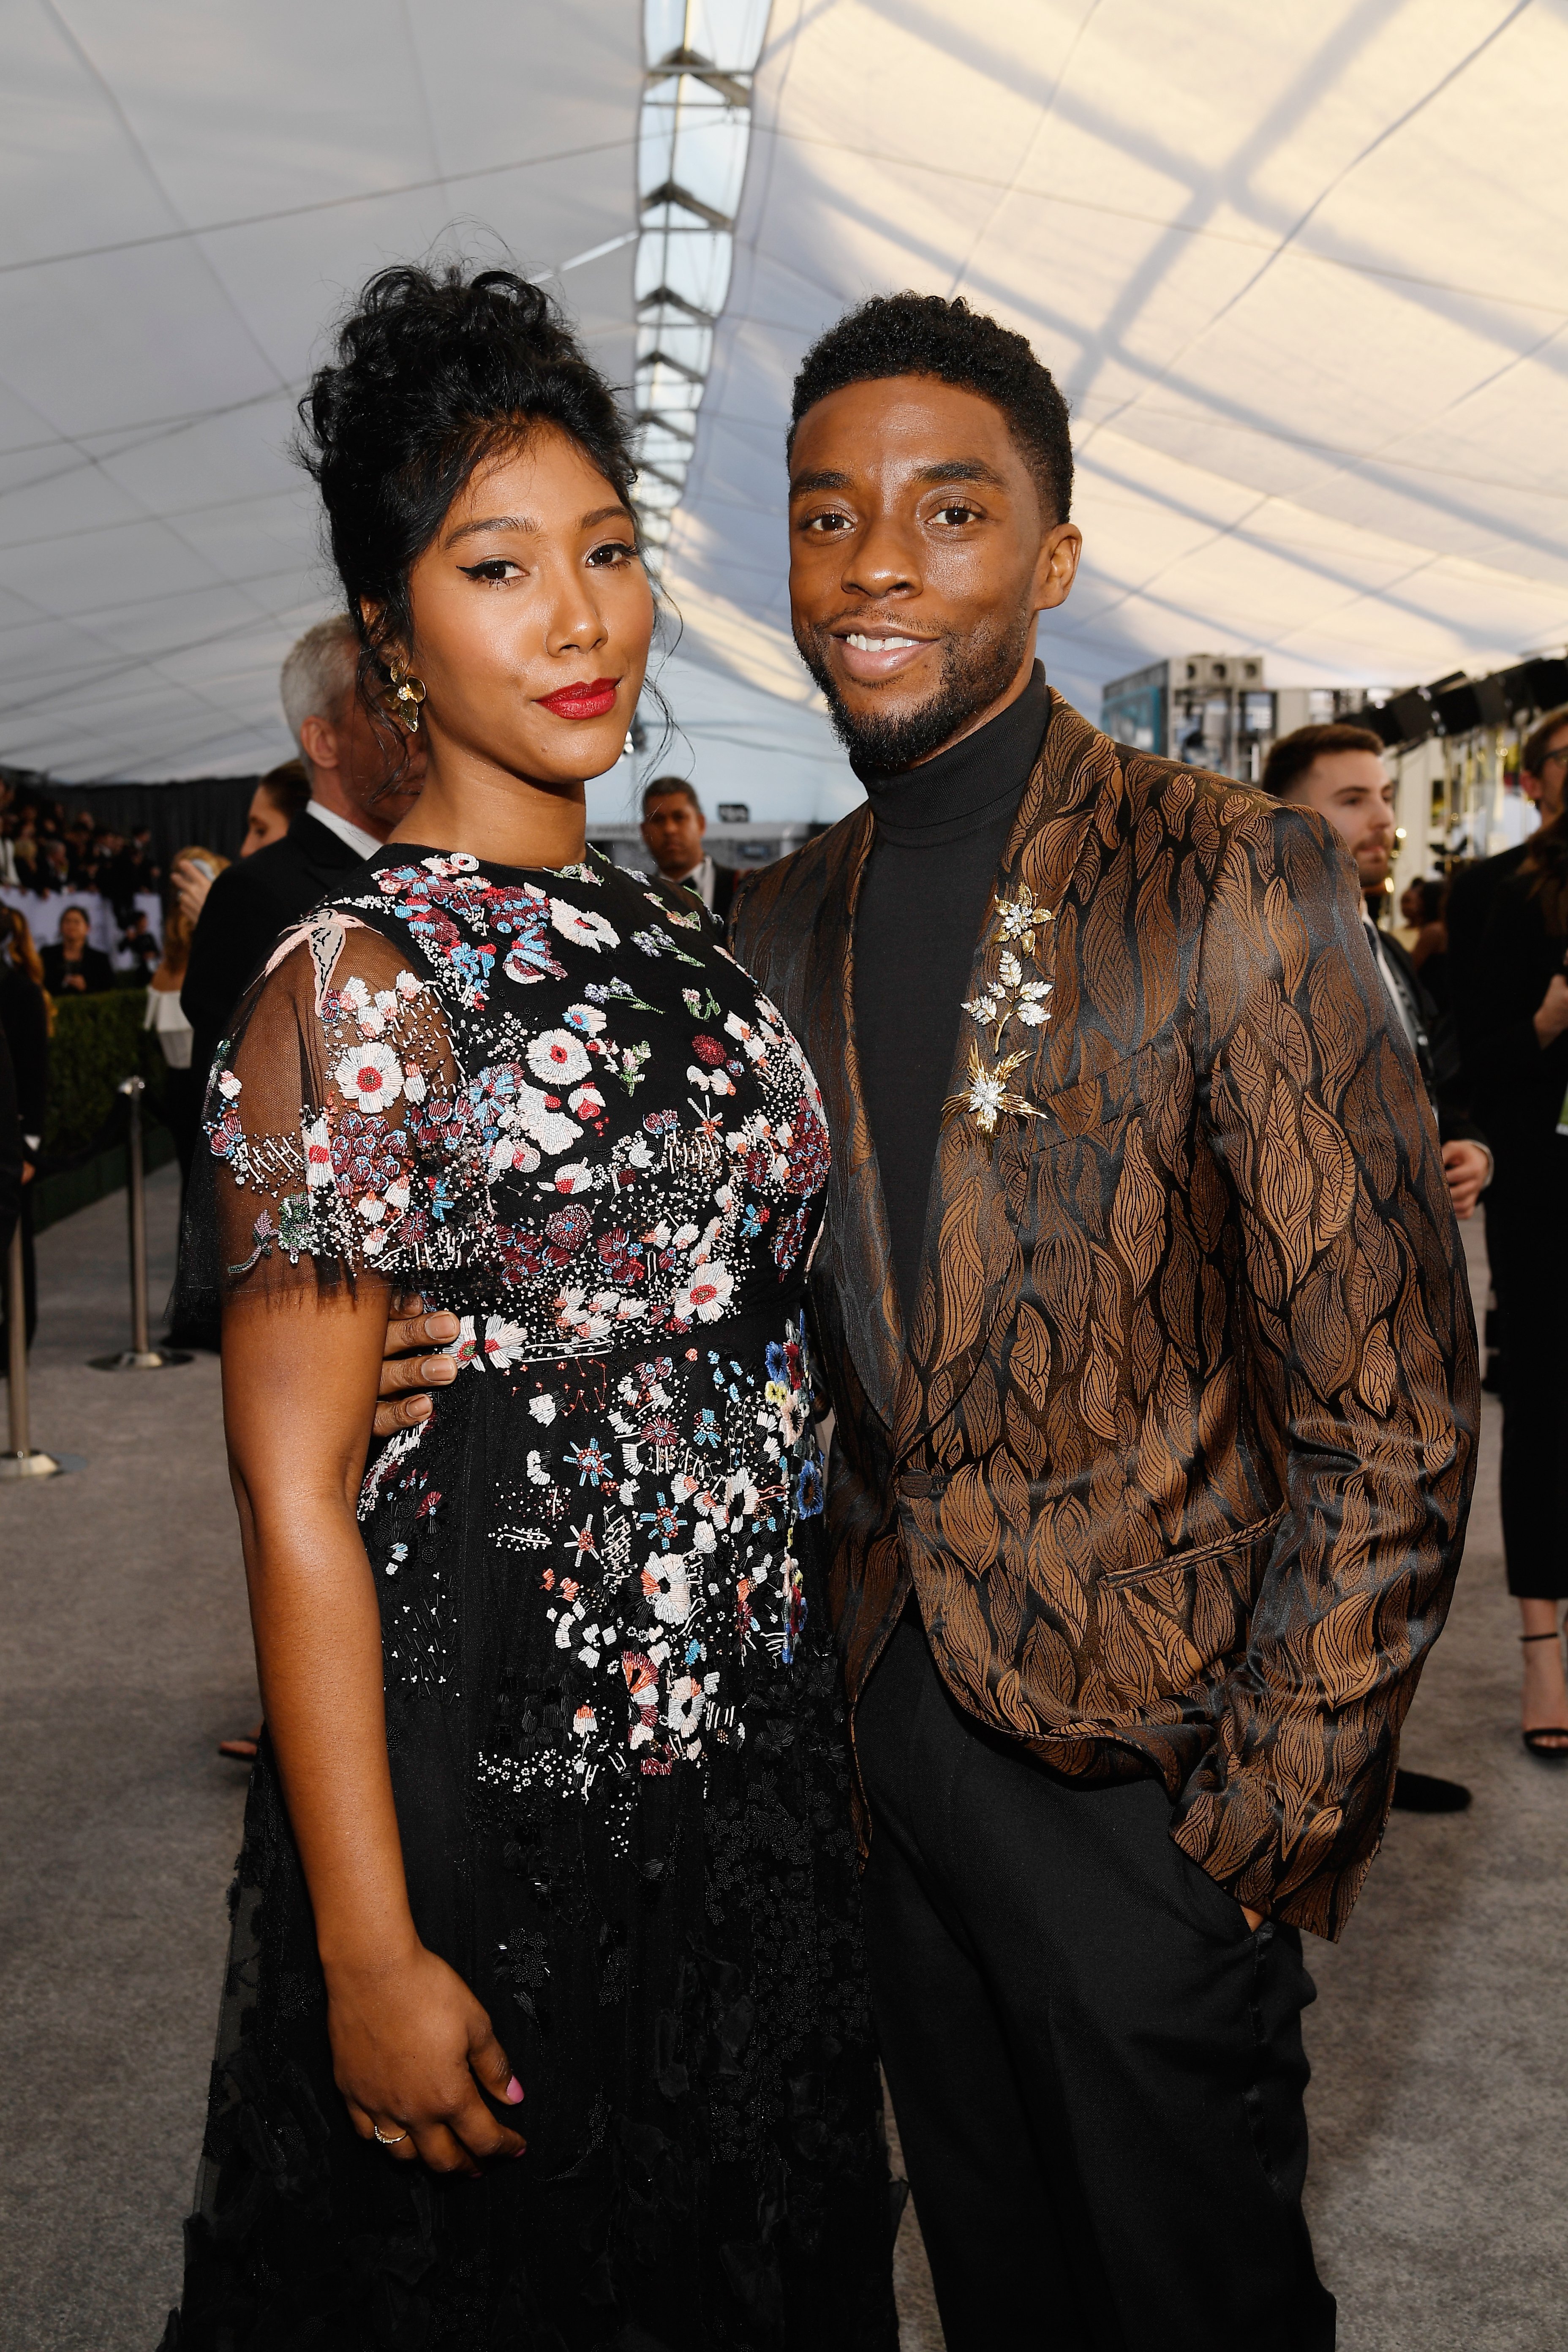 Chadwick Boseman and Simone Ledward at the 25th Annual Screen Actors Guild Awards at The Shrine Auditorium in Los Angeles, California | Photo: Kevork Djansezian/Getty Images